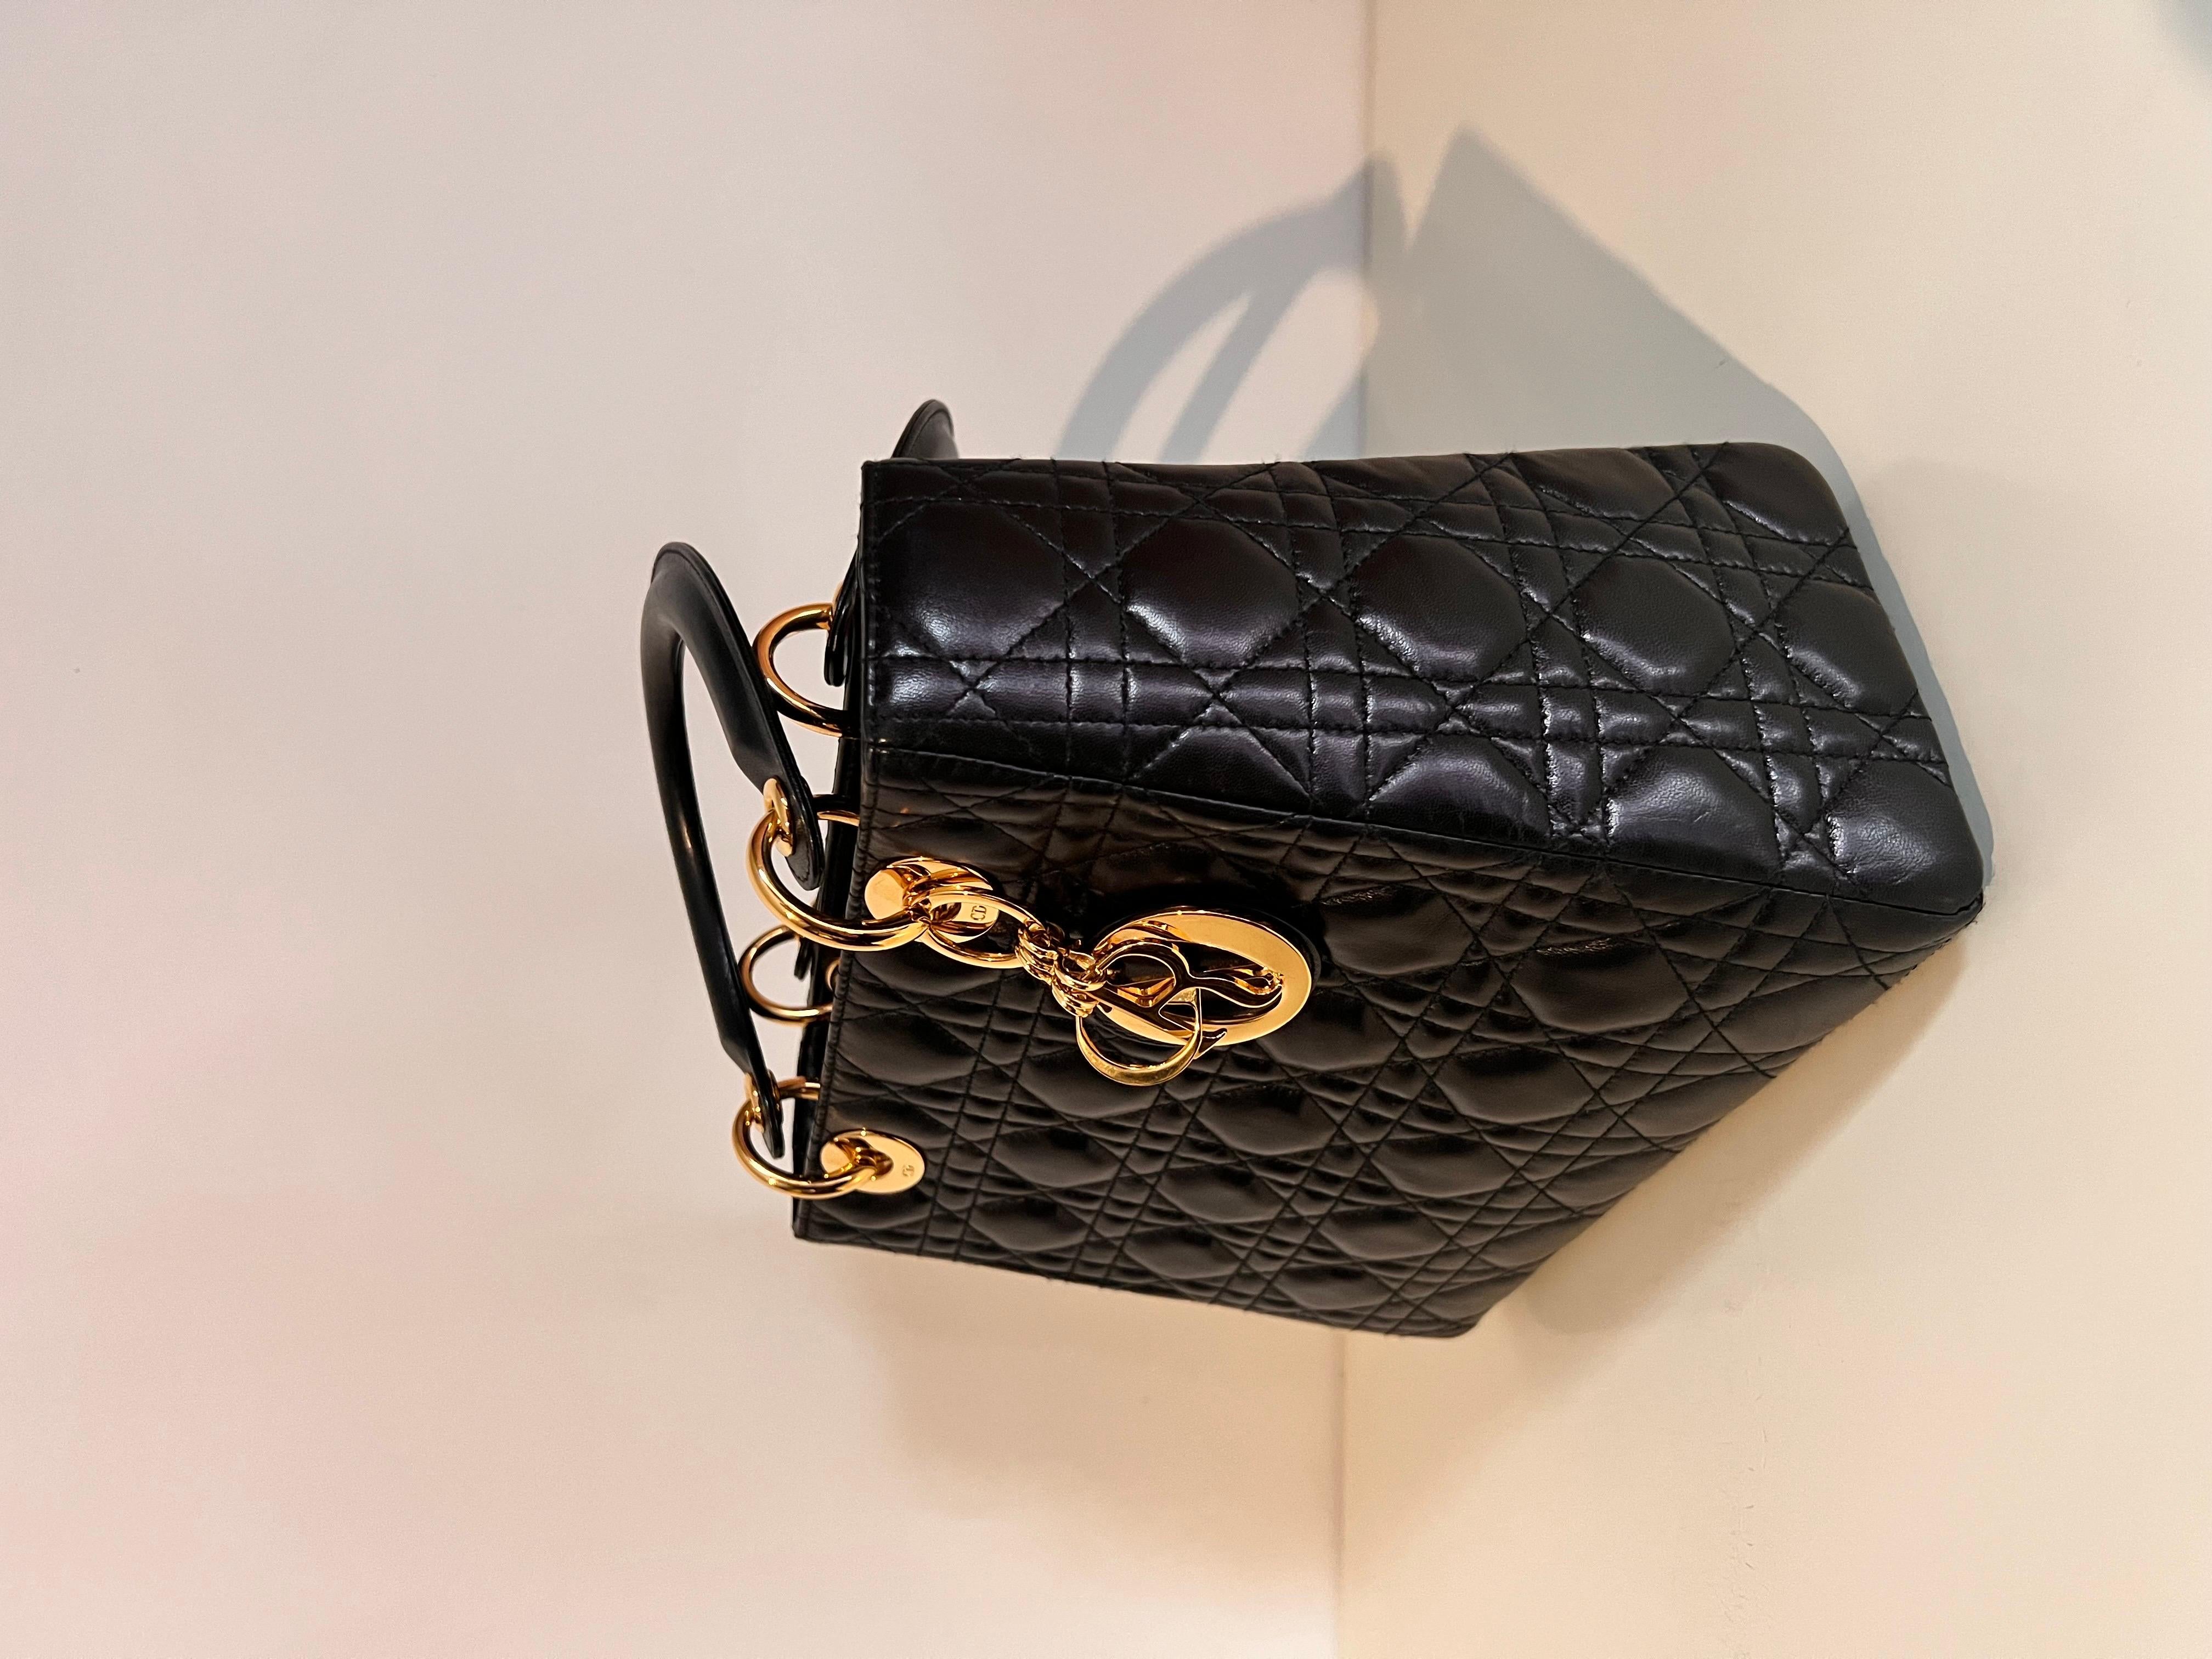 Lady DIOR quilted handbag with gold hardware, famously worn by Princess Diana  14